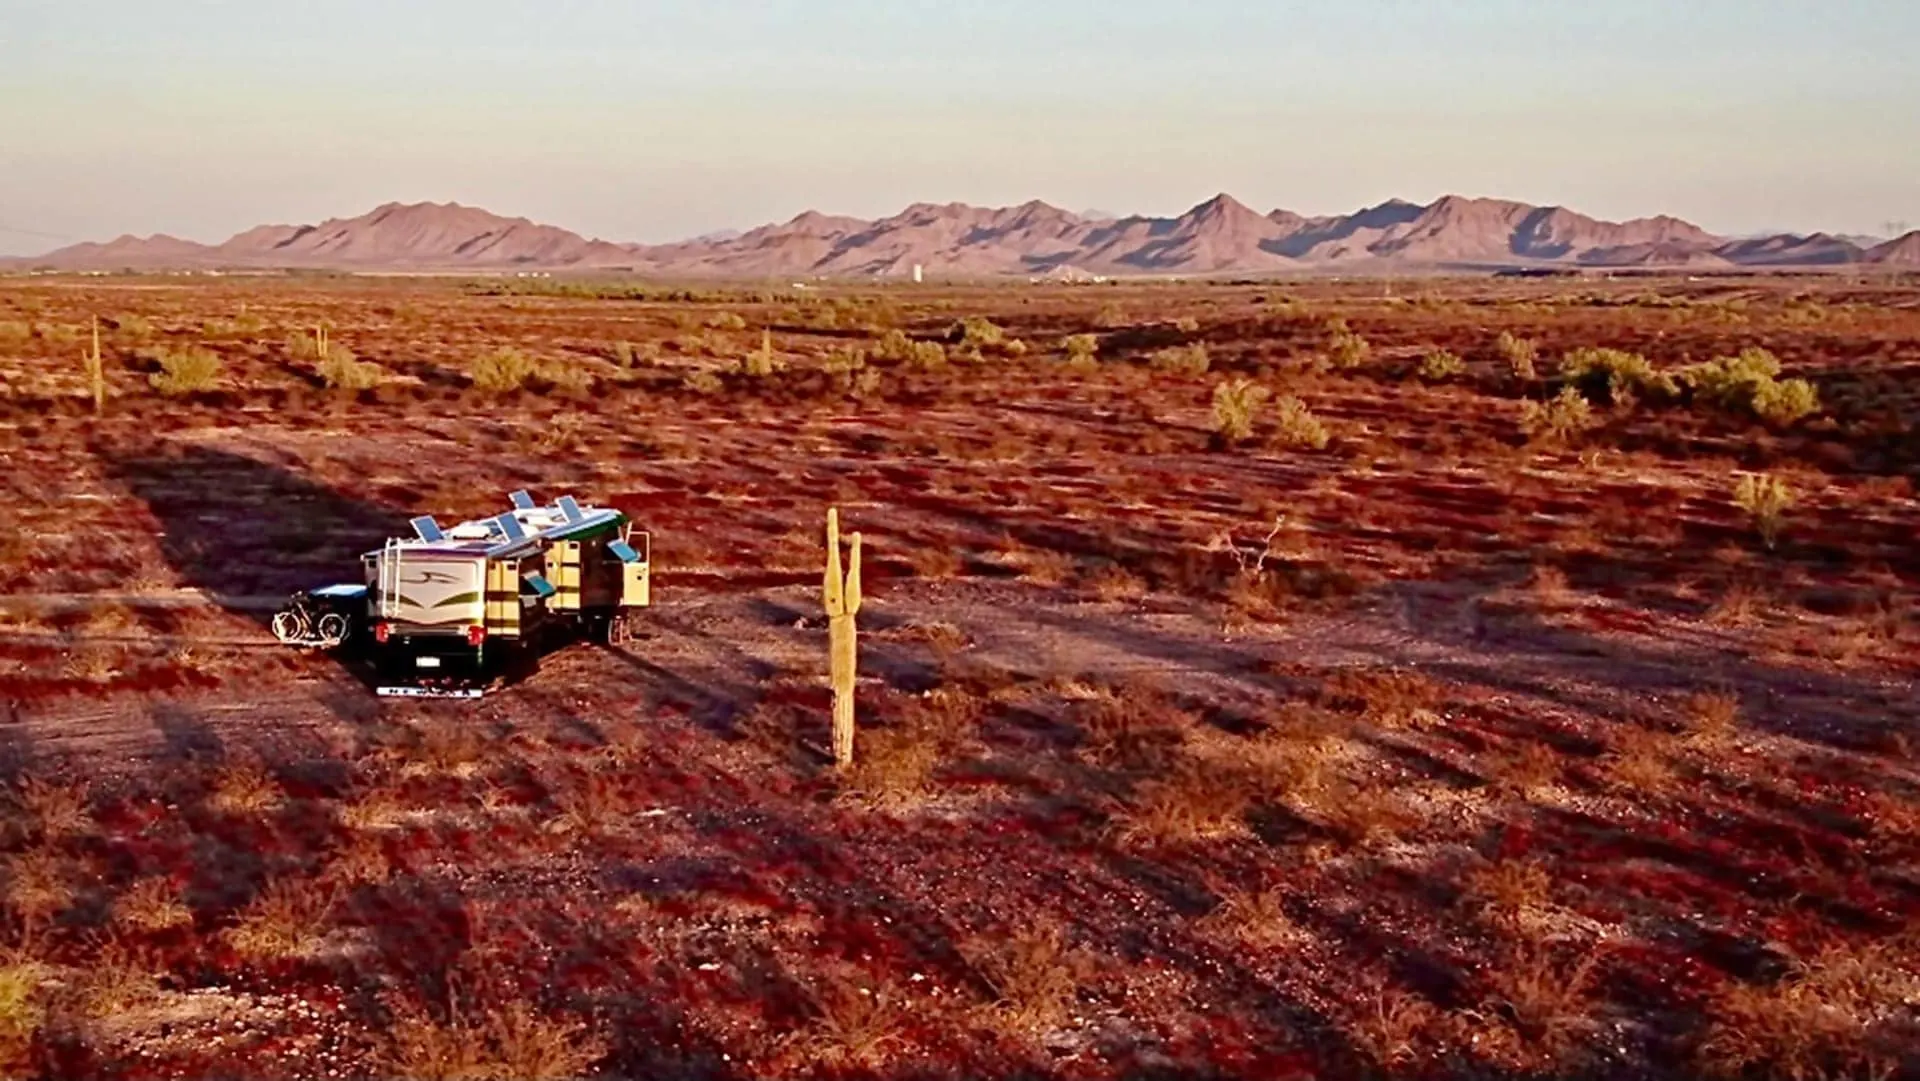 BLM Land offers great Class A RV boondocking locations